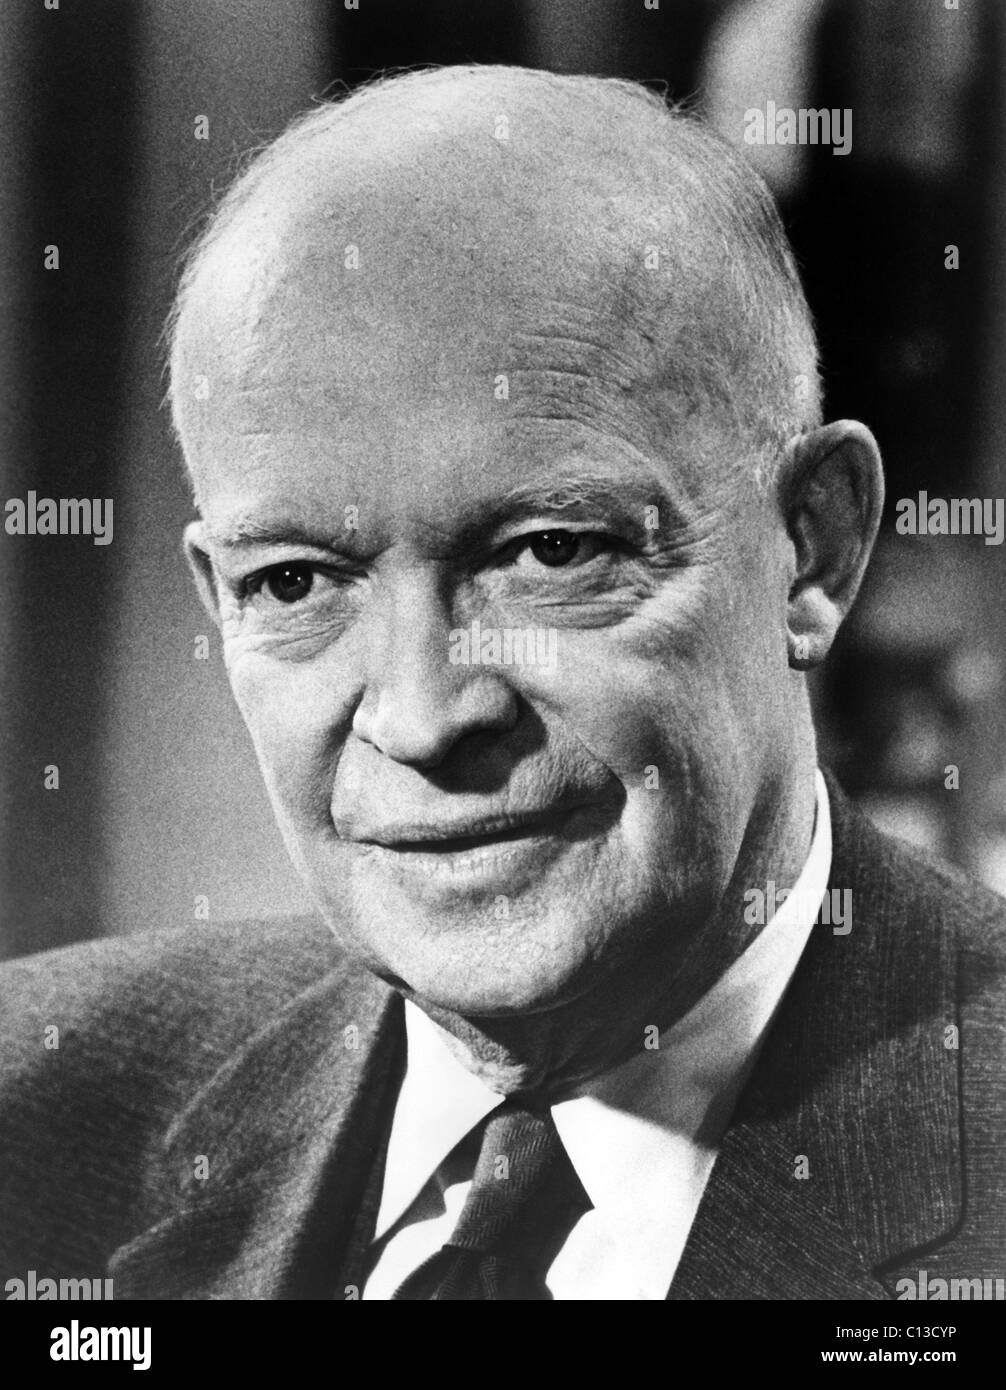 Dwight D. Eisenhower, president of the United States. ca. 1950s Stock Photo